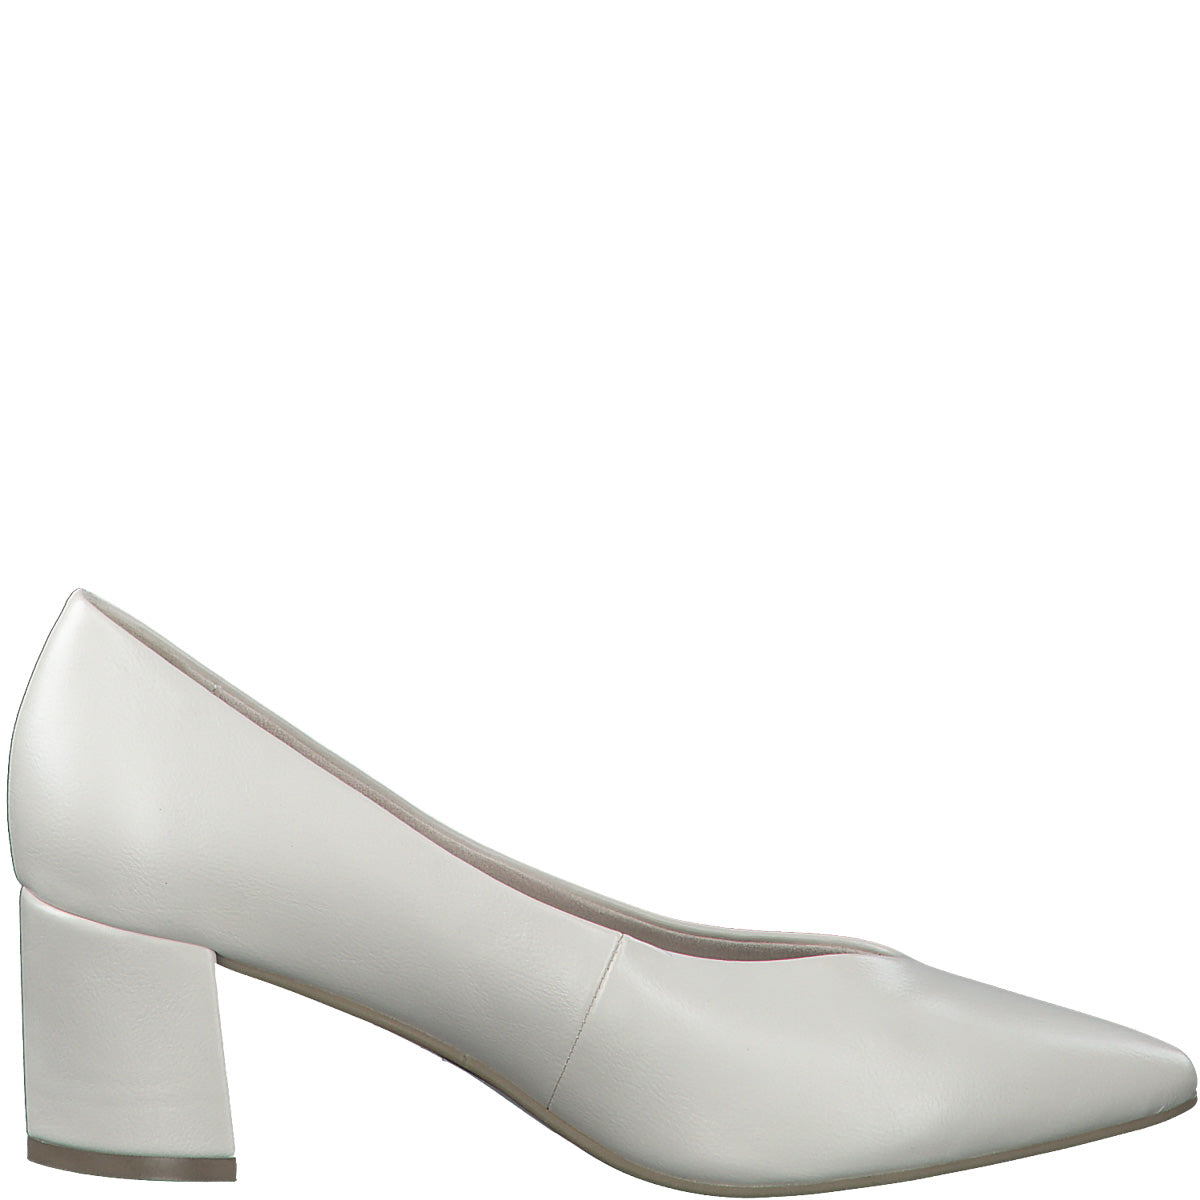 Fancy Smooth Pumps in Cream